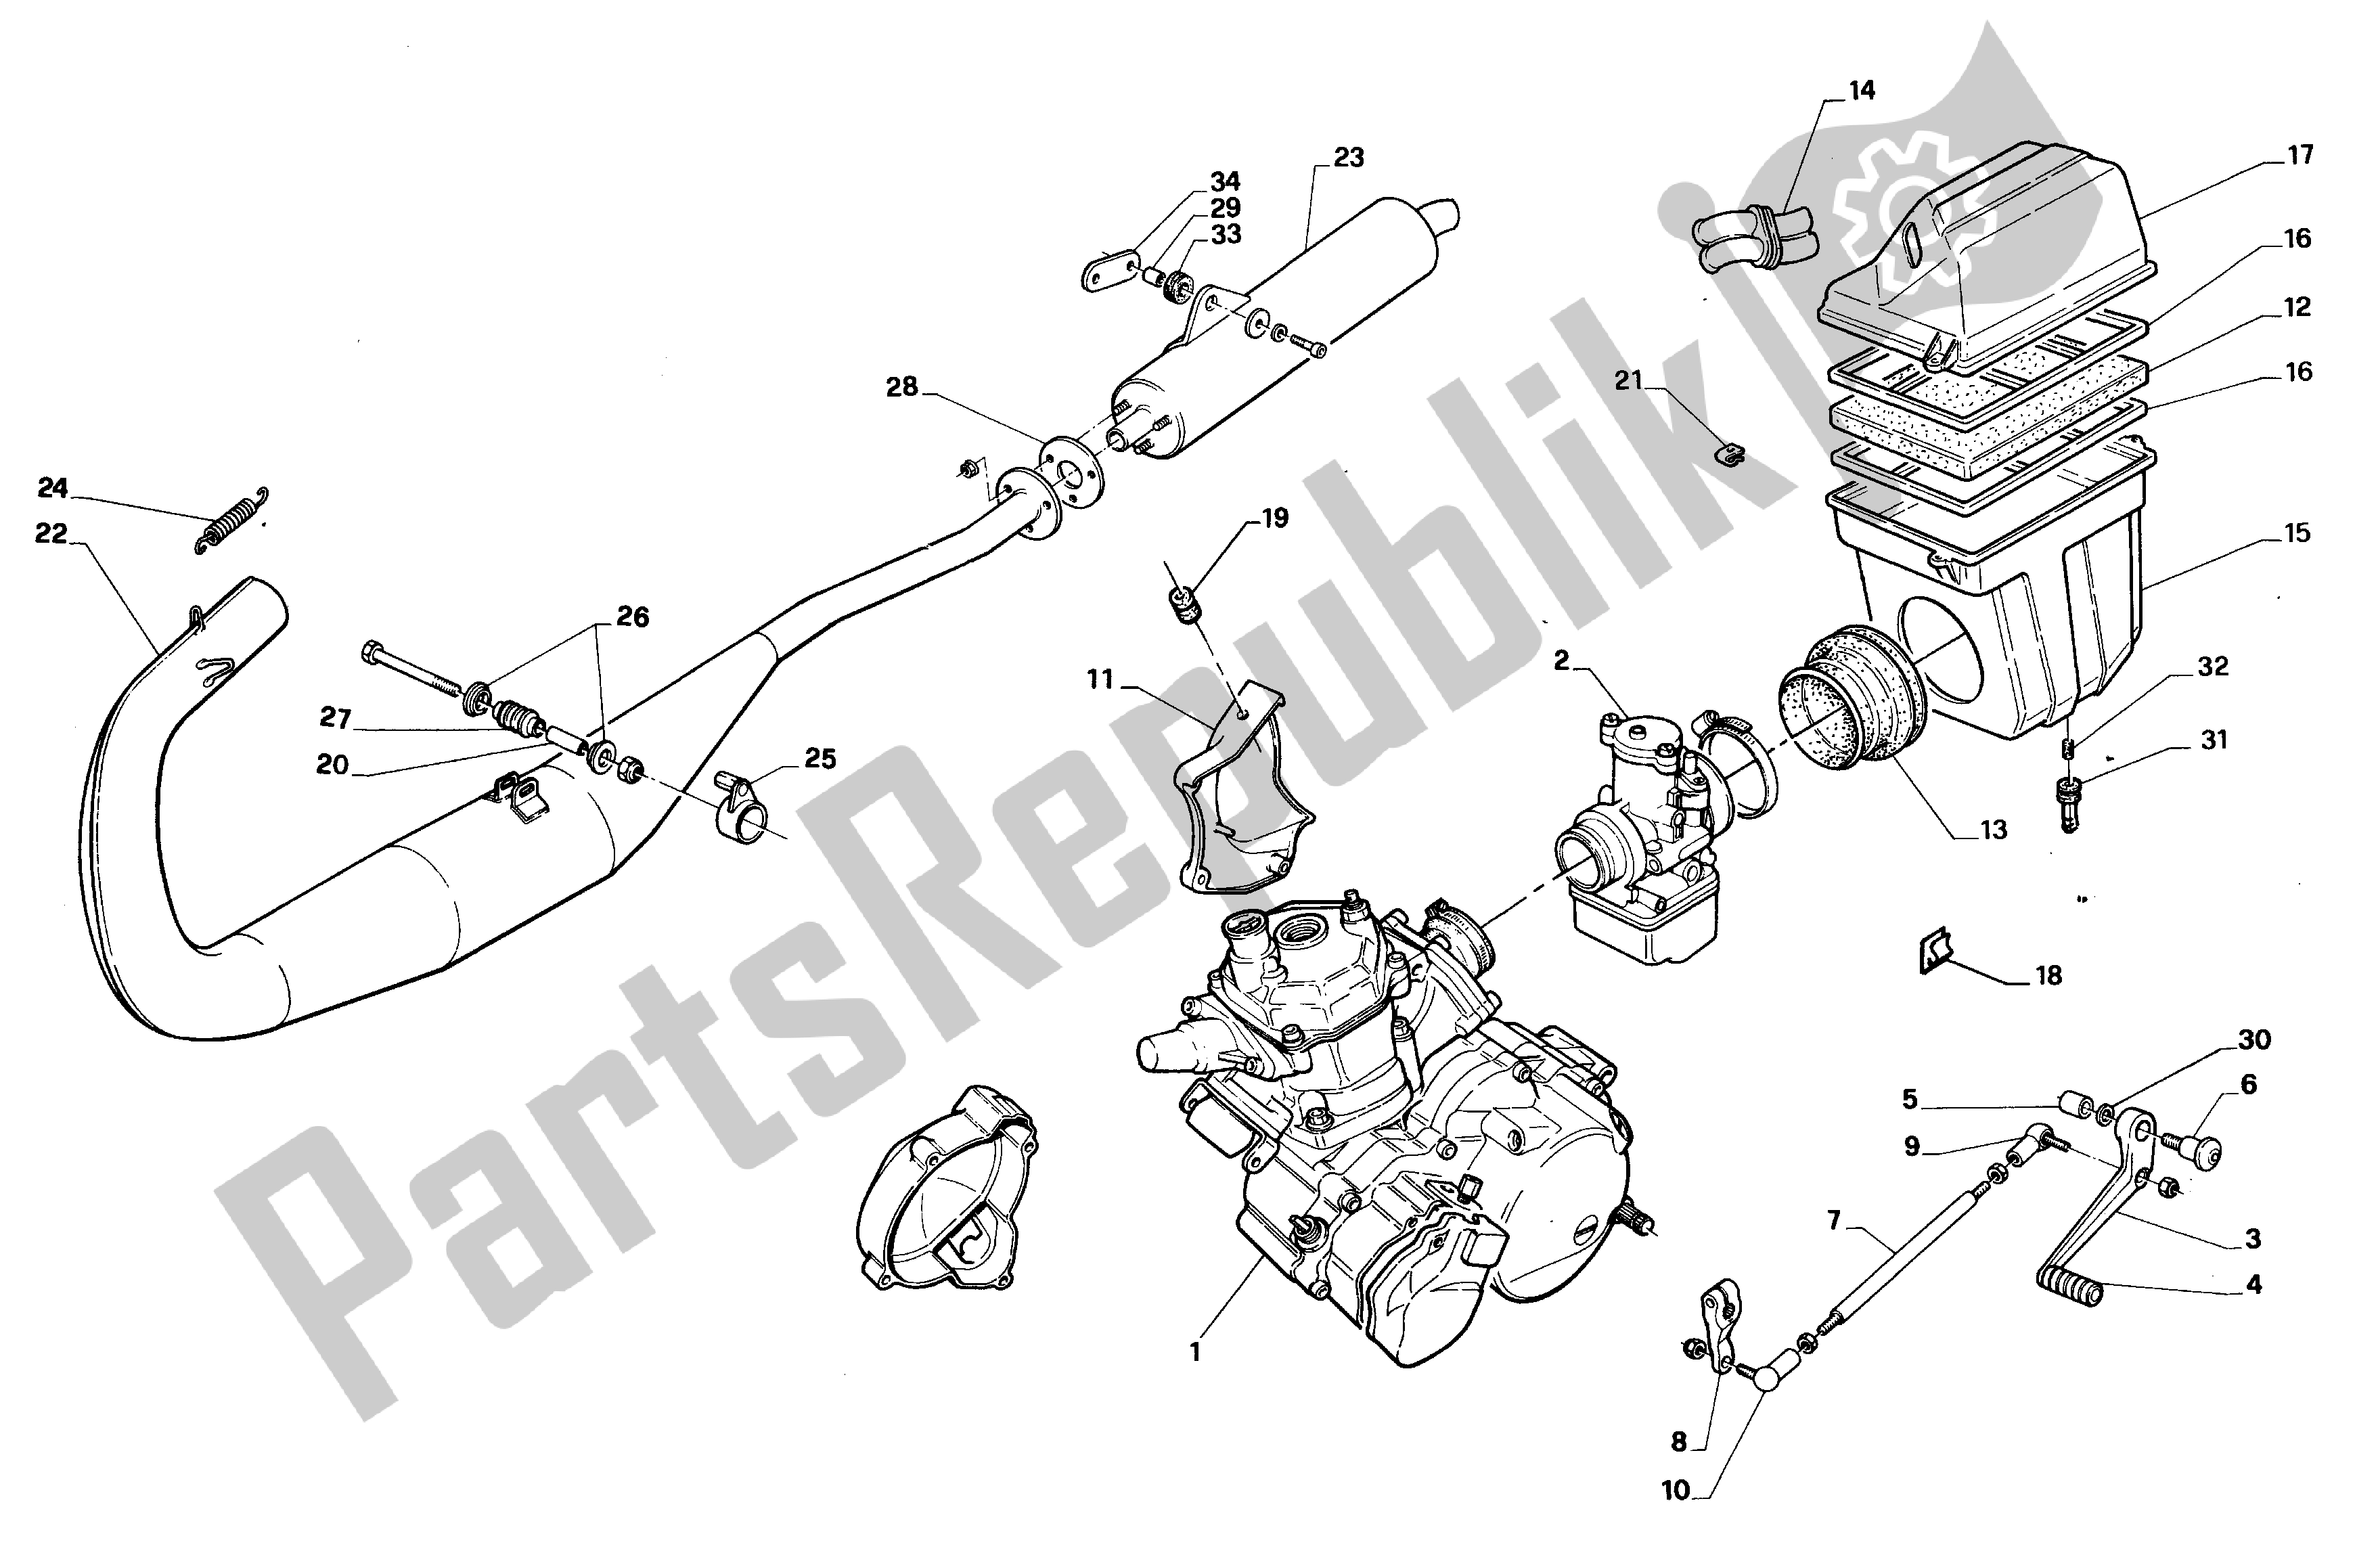 All parts for the Exhaust Assembly of the Aprilia RS 125 1992 - 1994